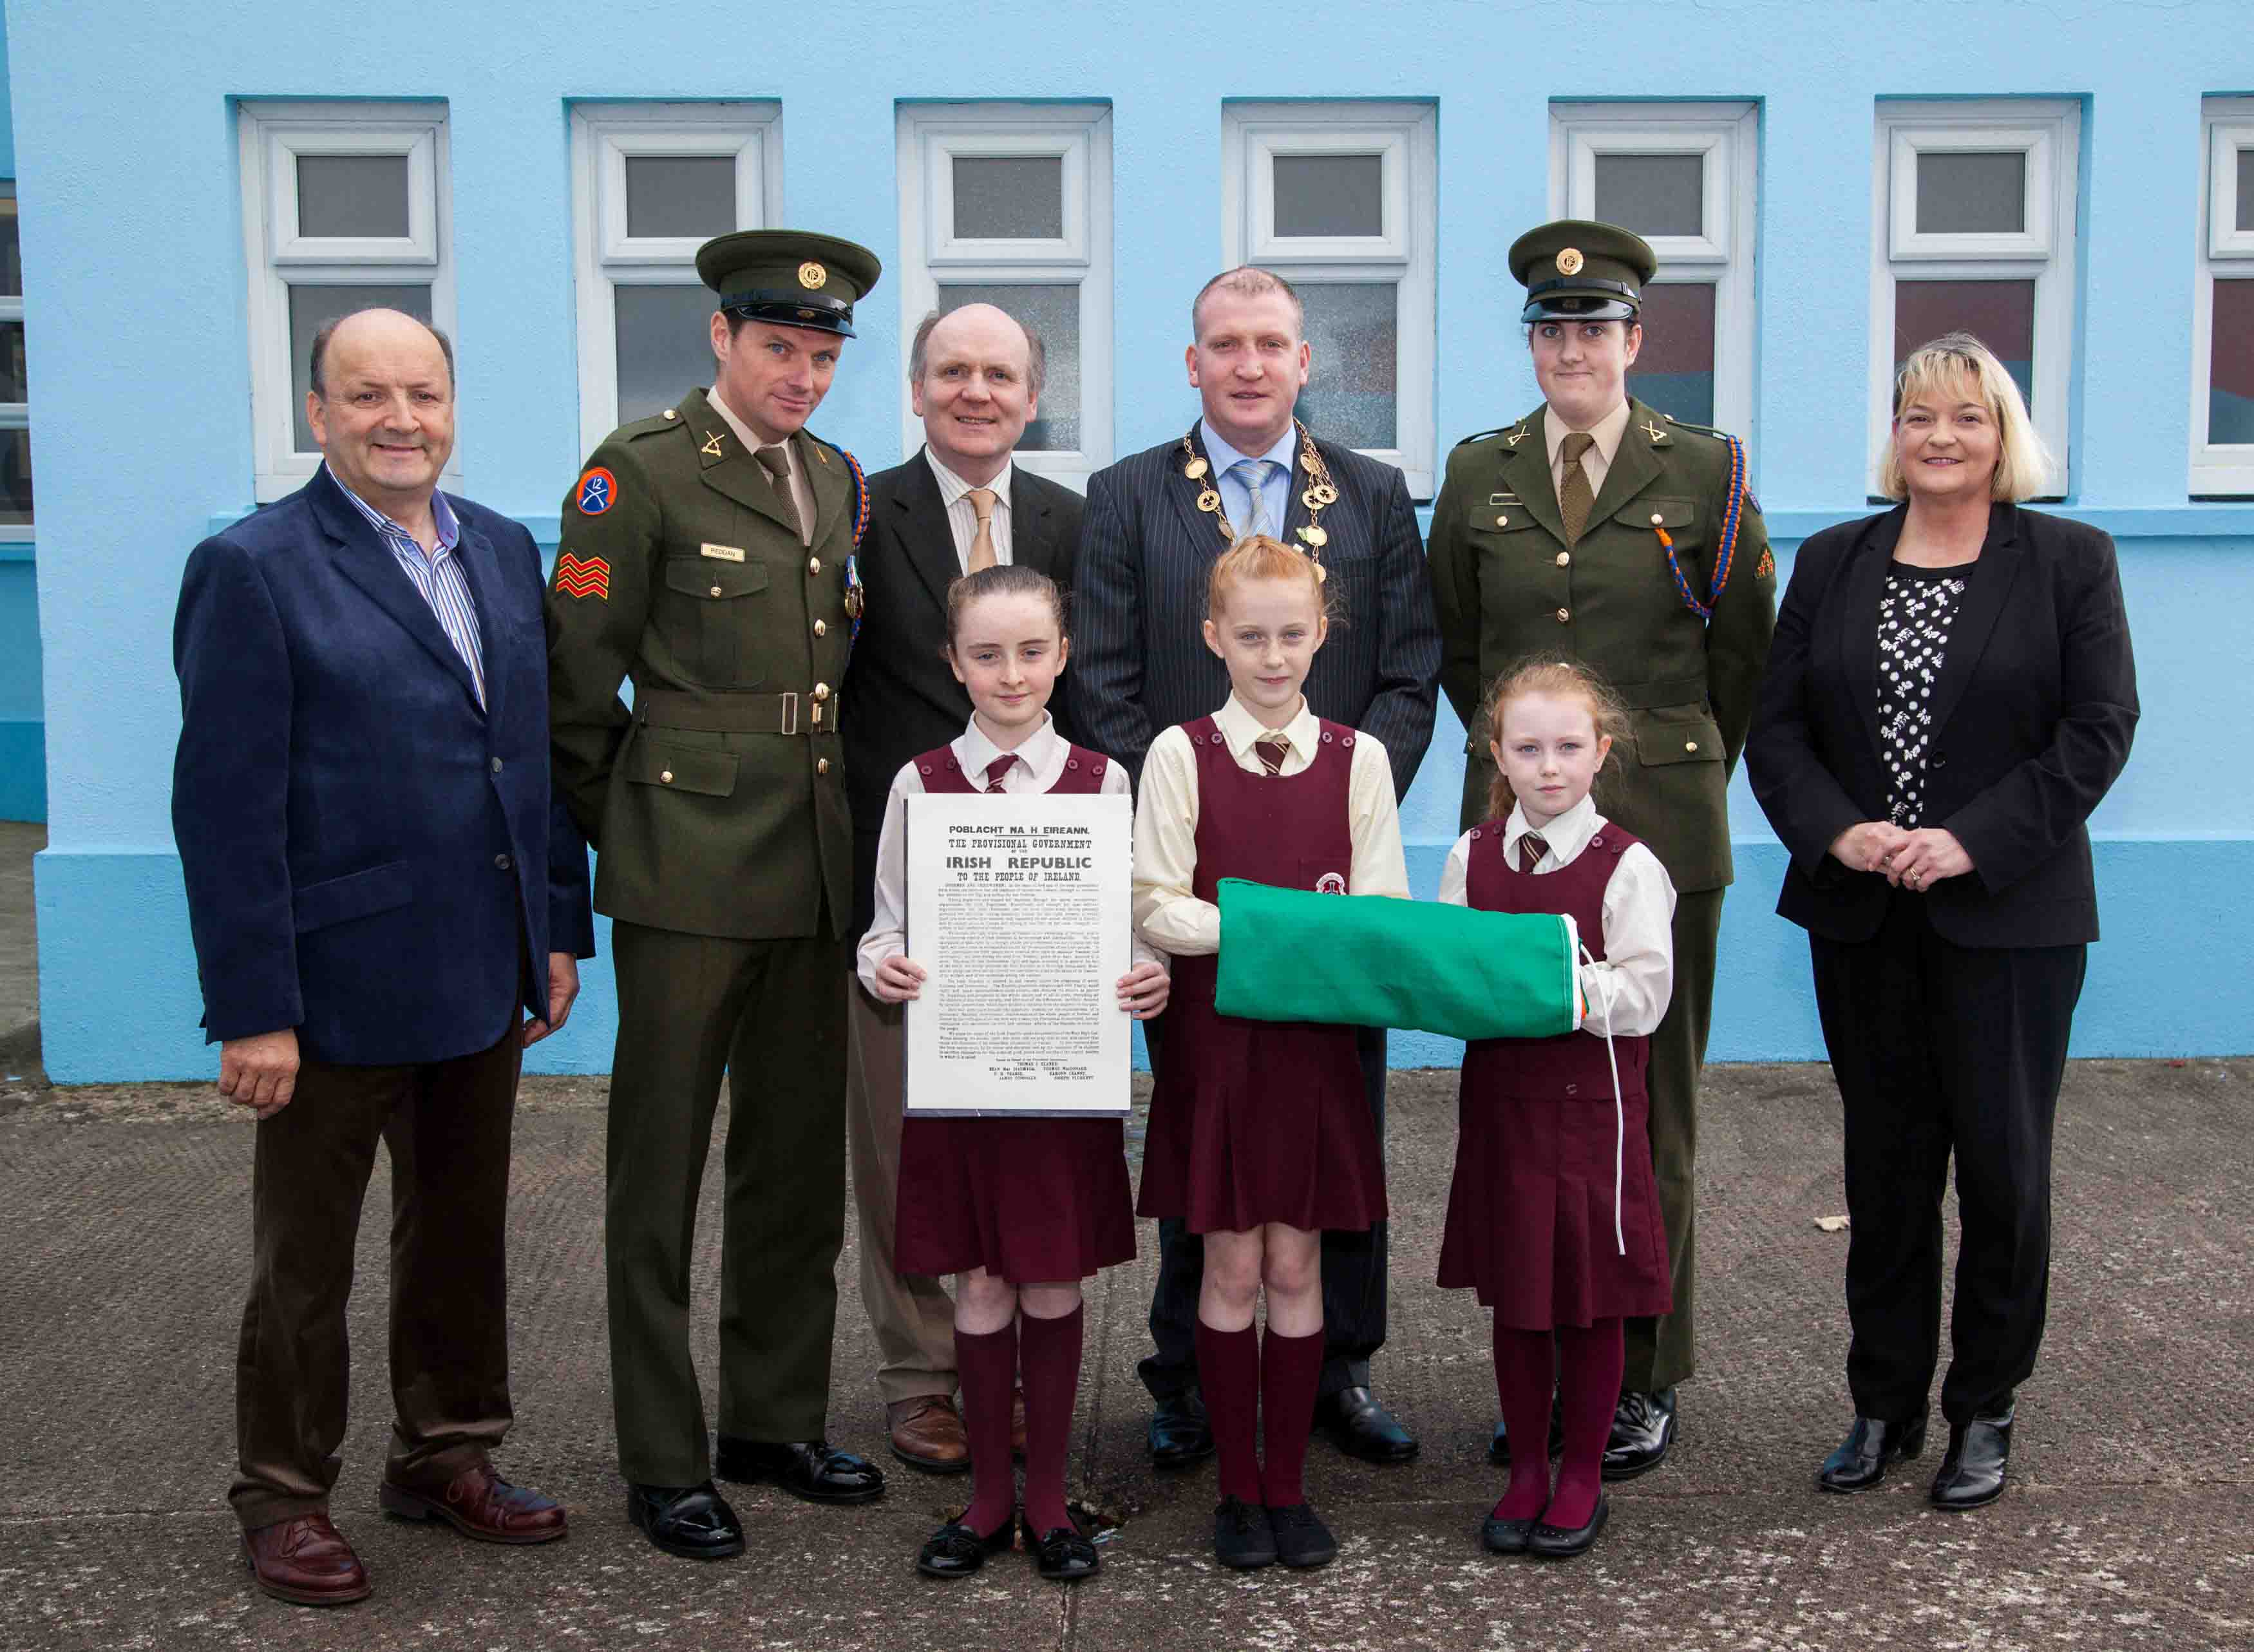 Defence Forces presented a handmade tricolour to Limerick schools